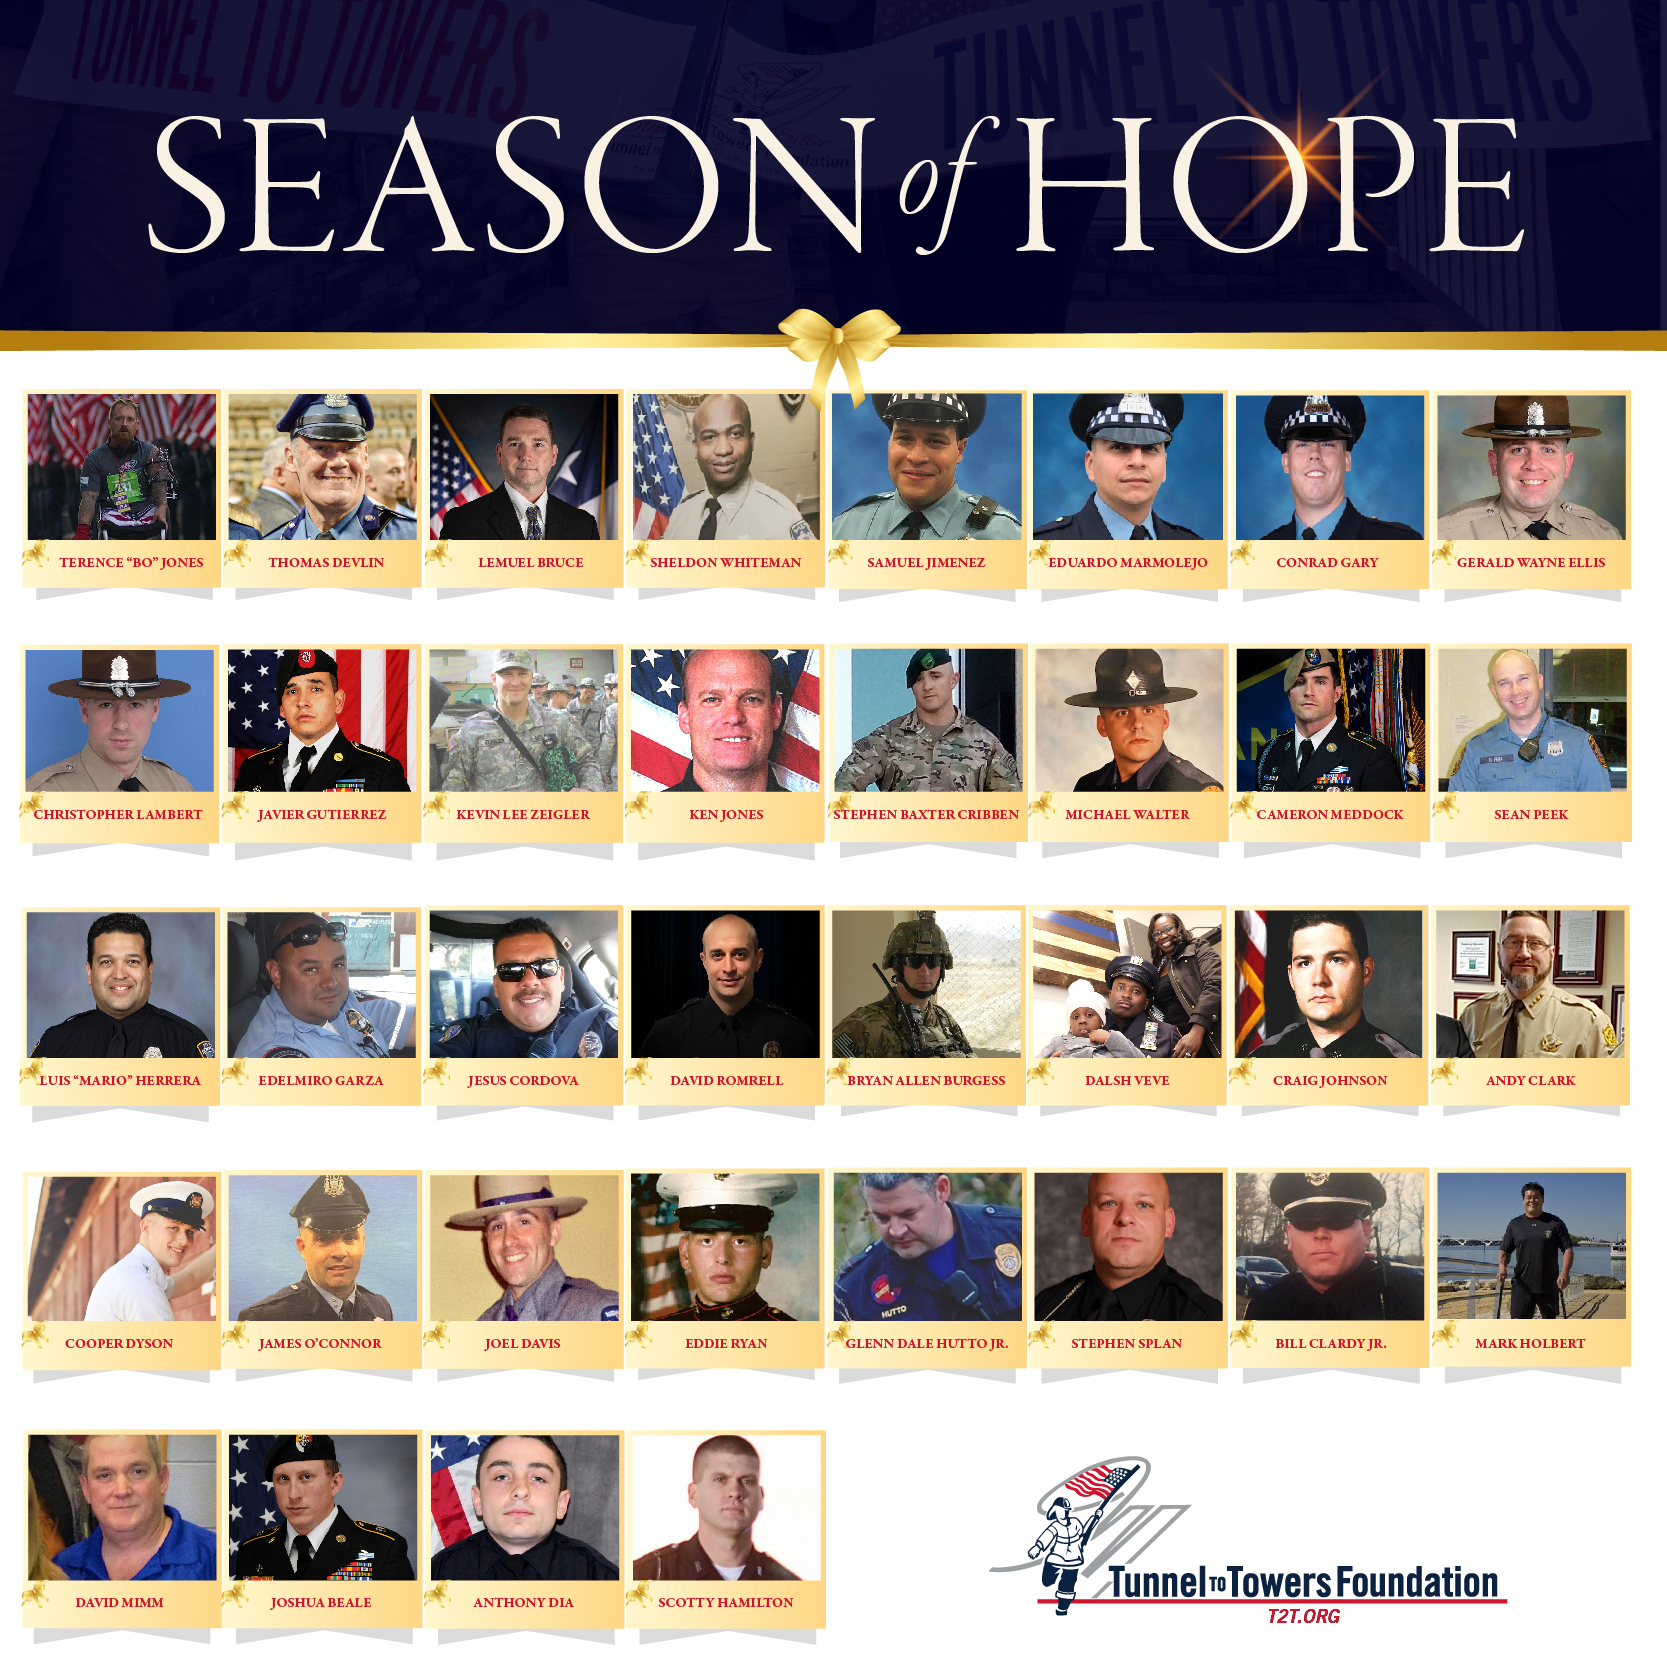 The Tunnel to Towers 2020 Season of Hope delivered 36 mortgage-free homes in the 36 day span between Thanksgiving and New Year's Eve. 